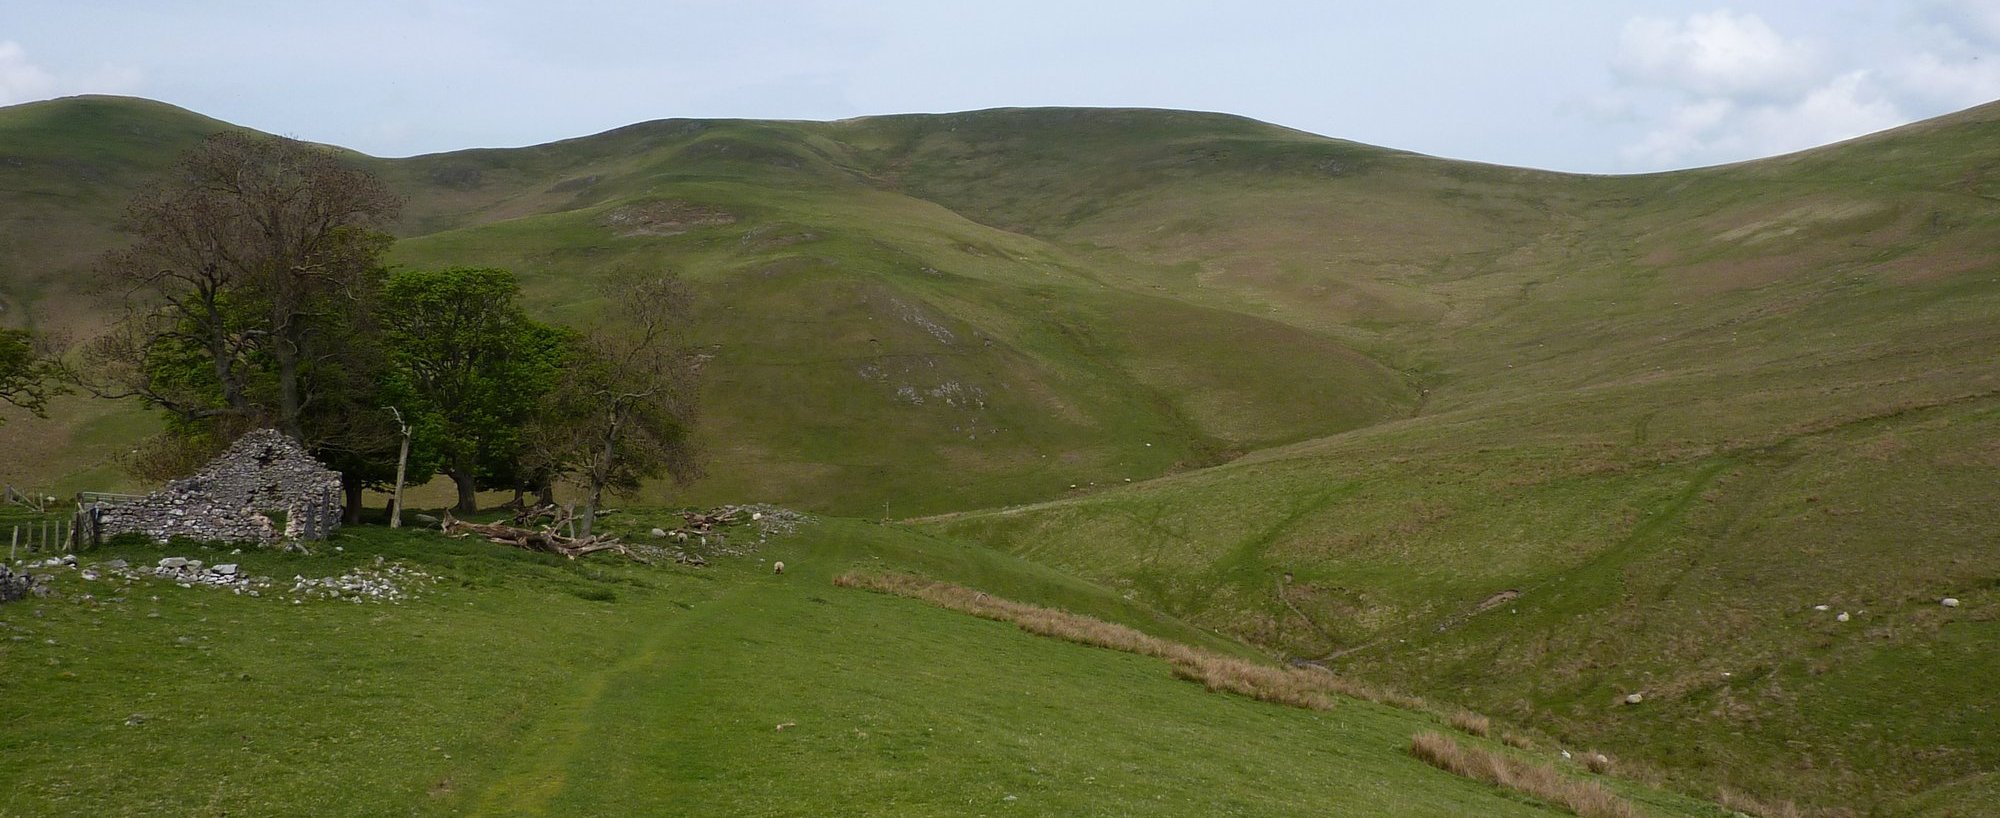 On final approach to Kirk Yetholm